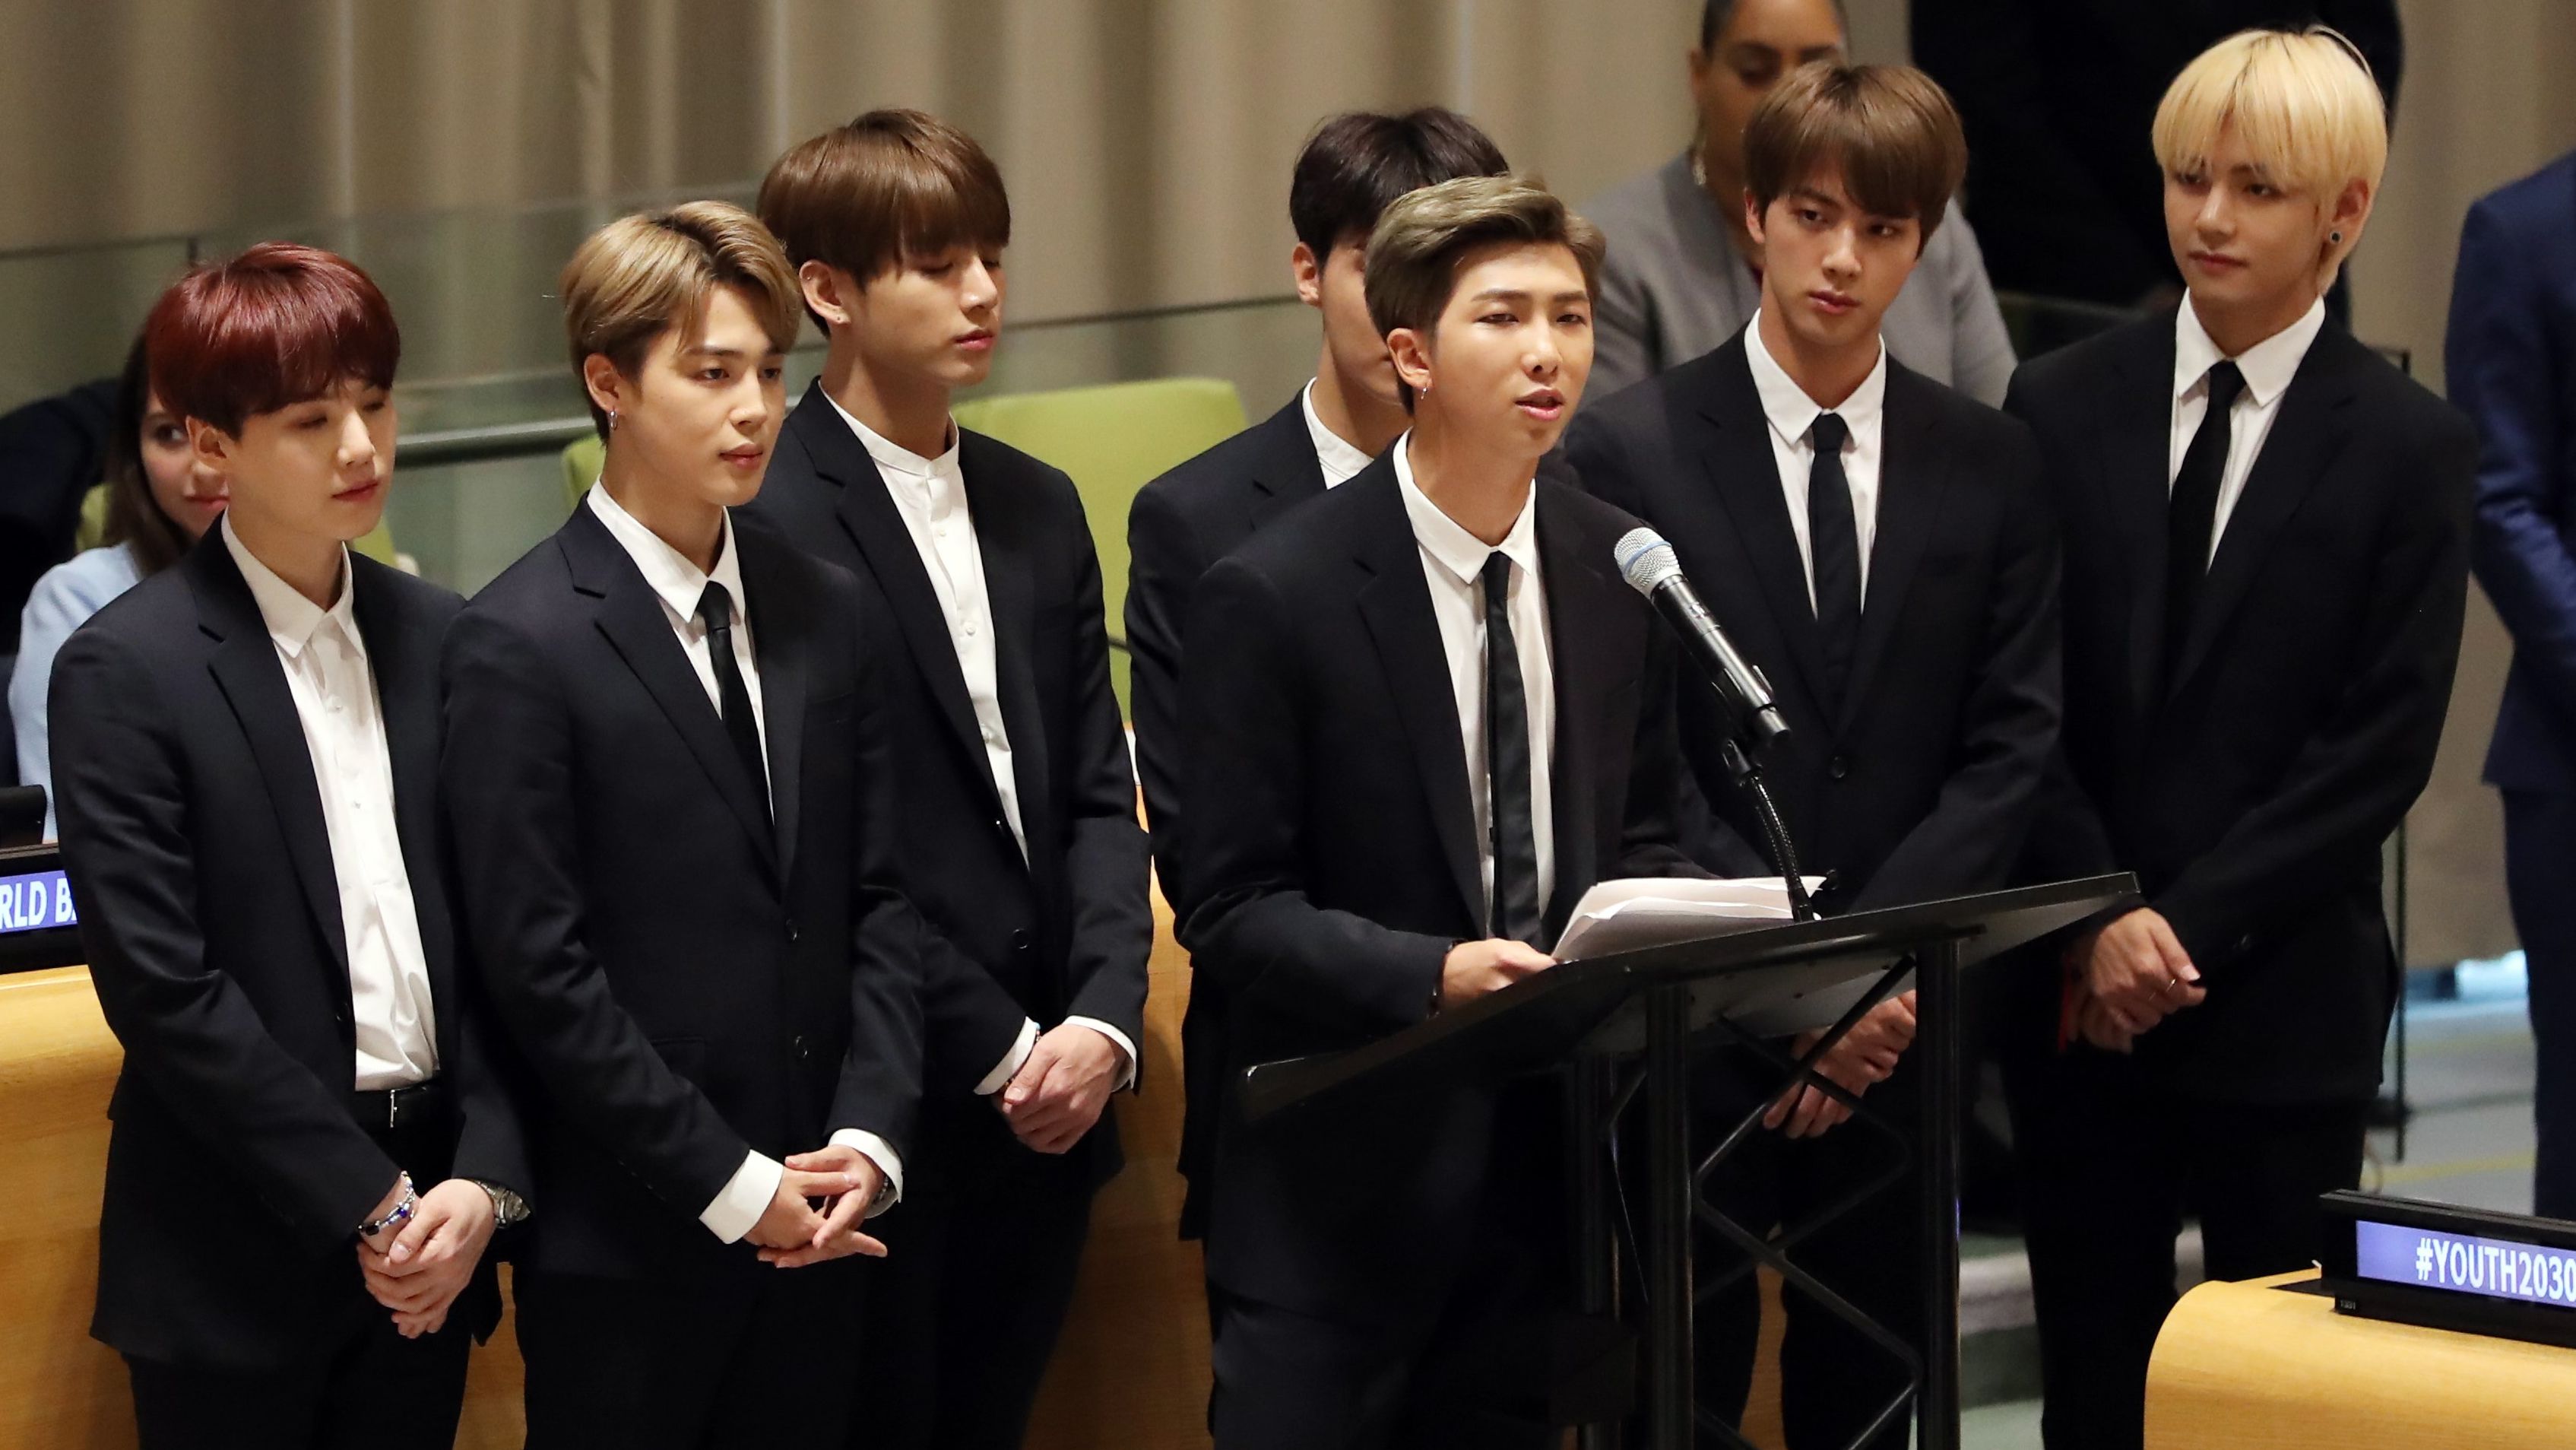 RM, the leader of the South Korean boy band BTS, announces the launch of "Generation Unlimited," a UNICEF youth campaign aimed at promoting education, training and employment. 